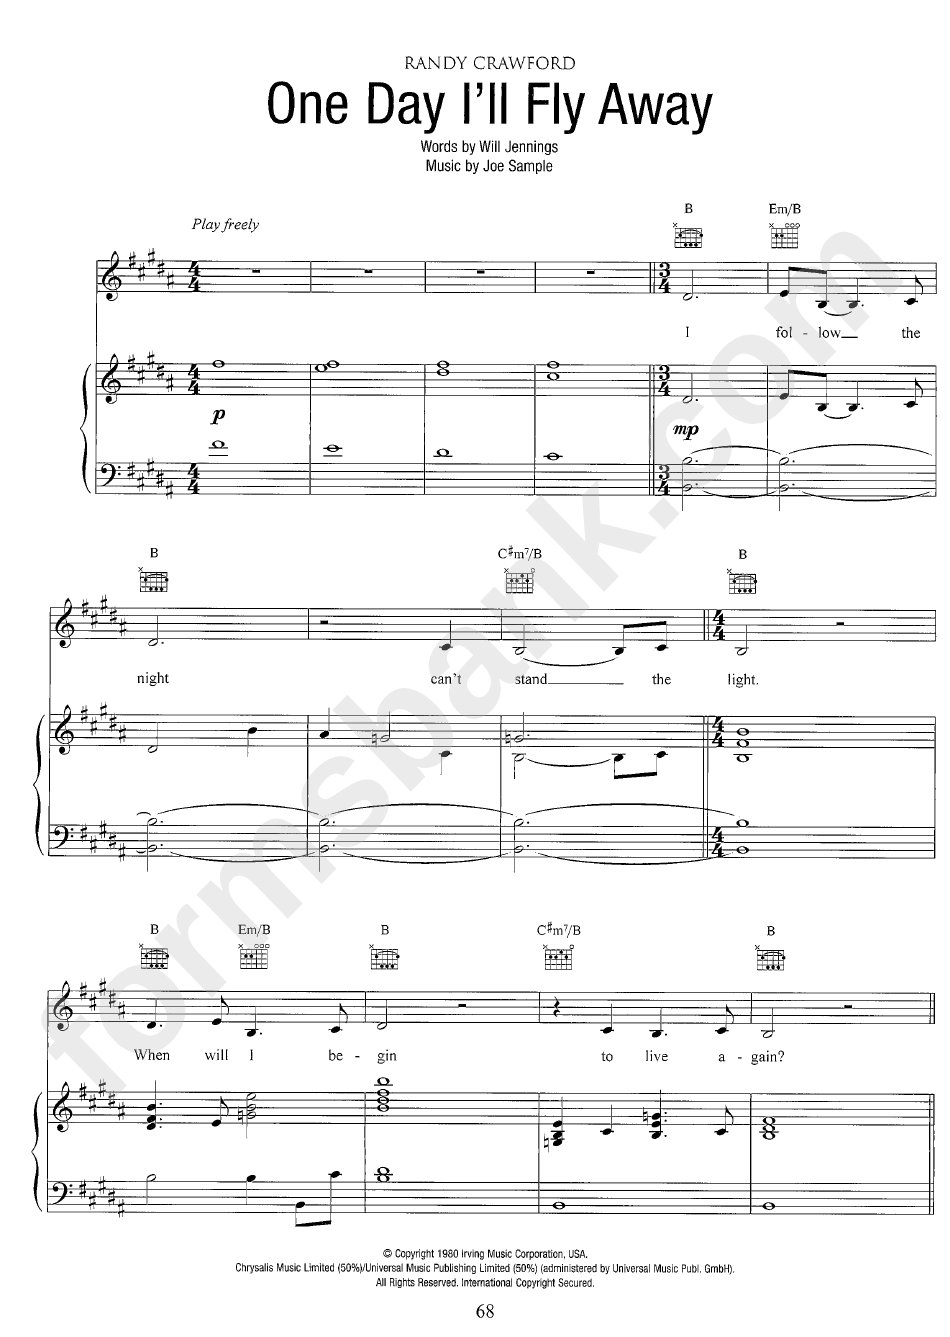 One Day I Ll Fly Away Randy Crawford Sheet Music printable pdf download